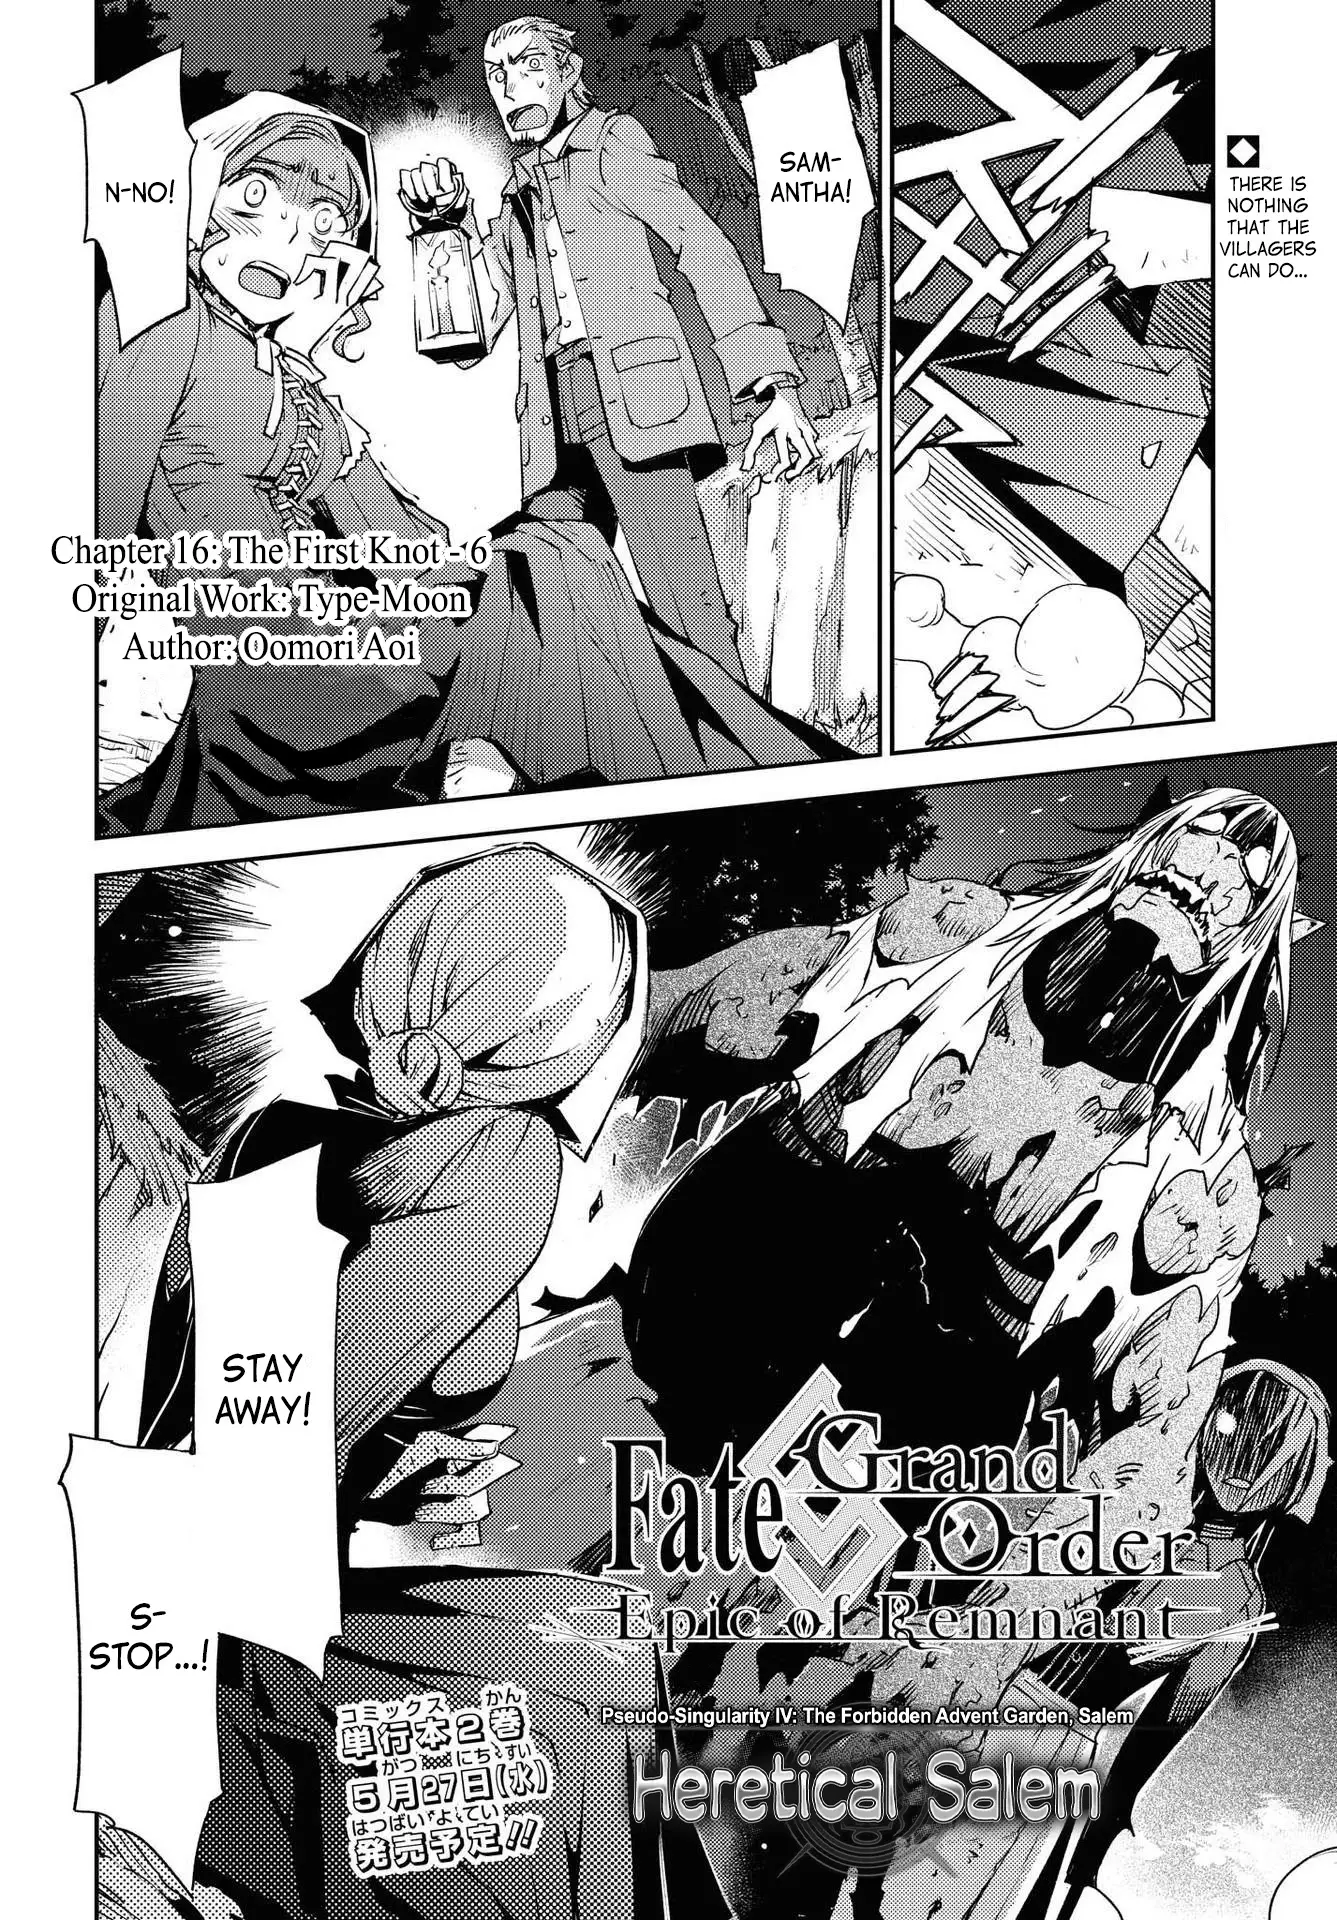 Fate/grand Order: Epic Of Remnant - Subspecies Singularity Iv: Taboo Advent Salem: Salem Of Heresy - 16 page 2